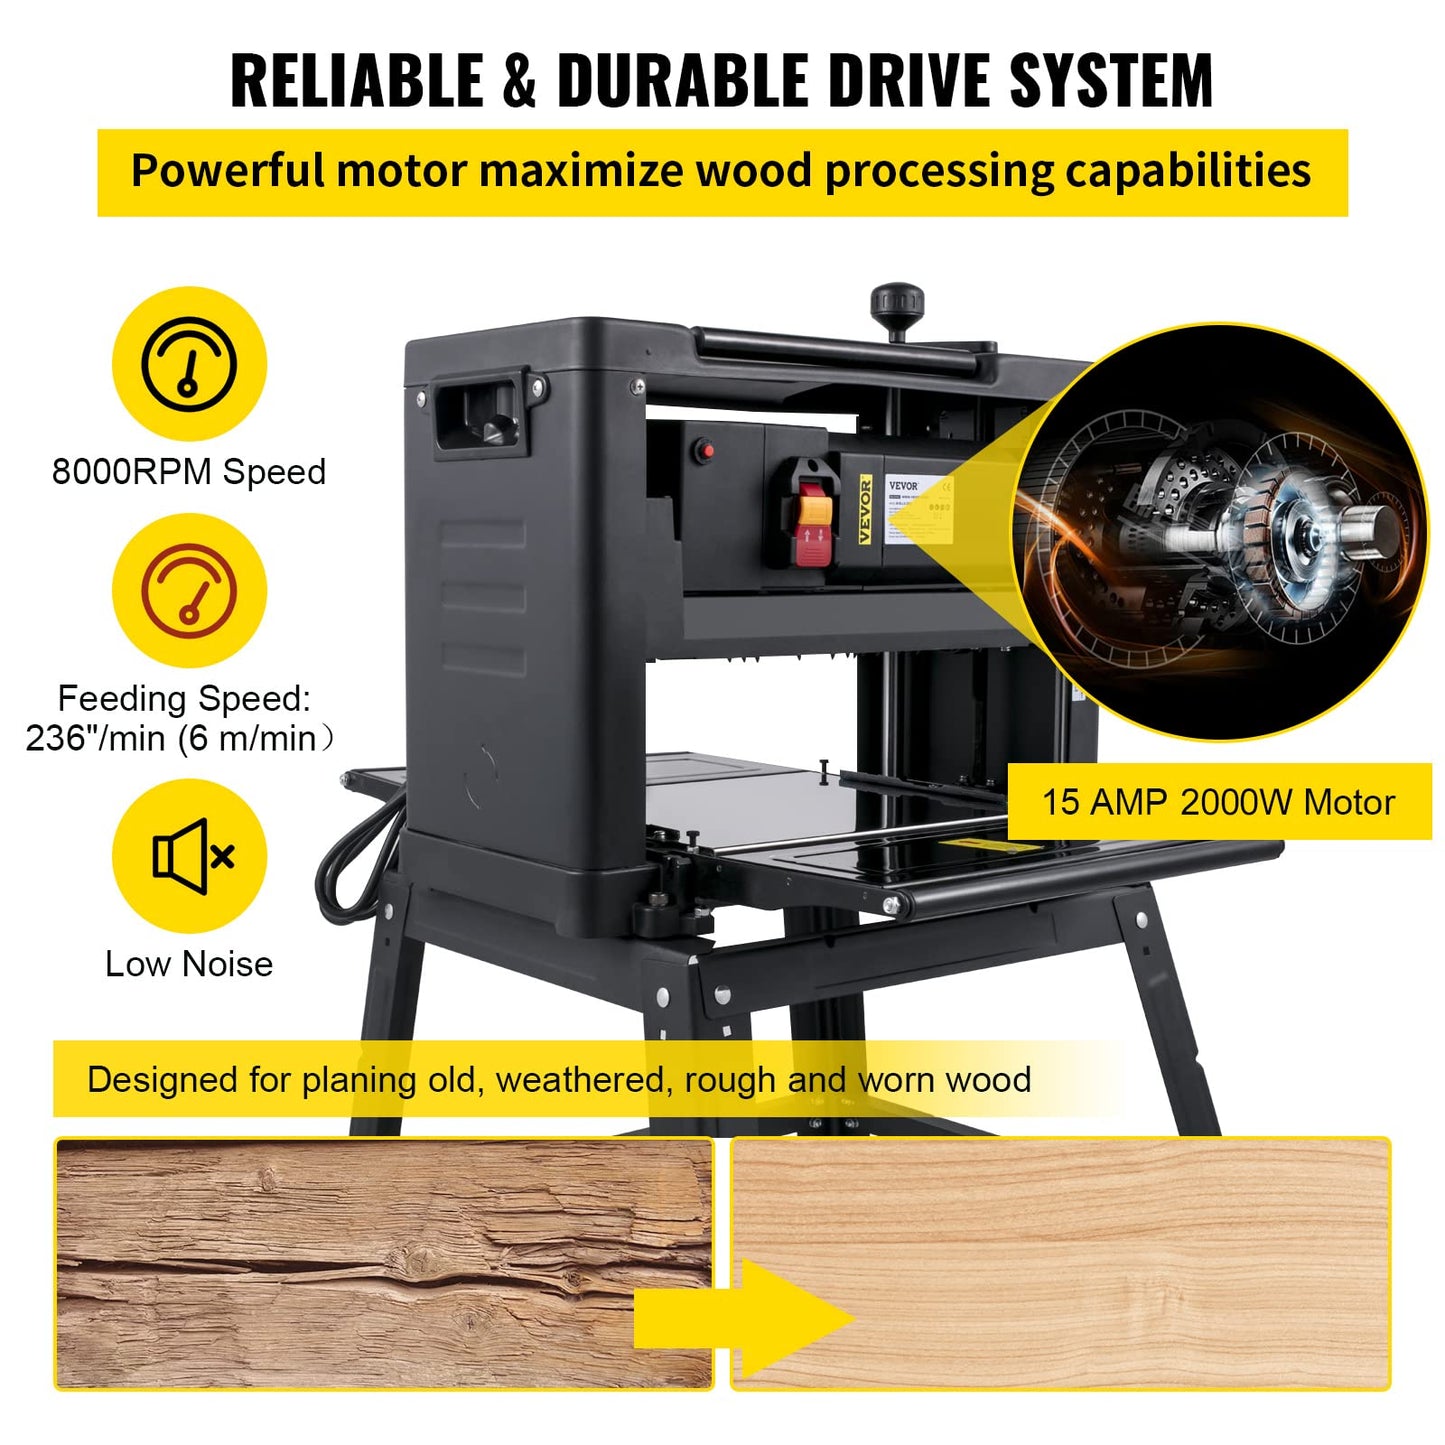 VEVOR Thickness Planer 13-Inch Benchtop Planer 2000W Wood Planer 8000 rpm Woodworking Planer 15 AMP Wood Planer Foldable 6m/min Planing Speed with